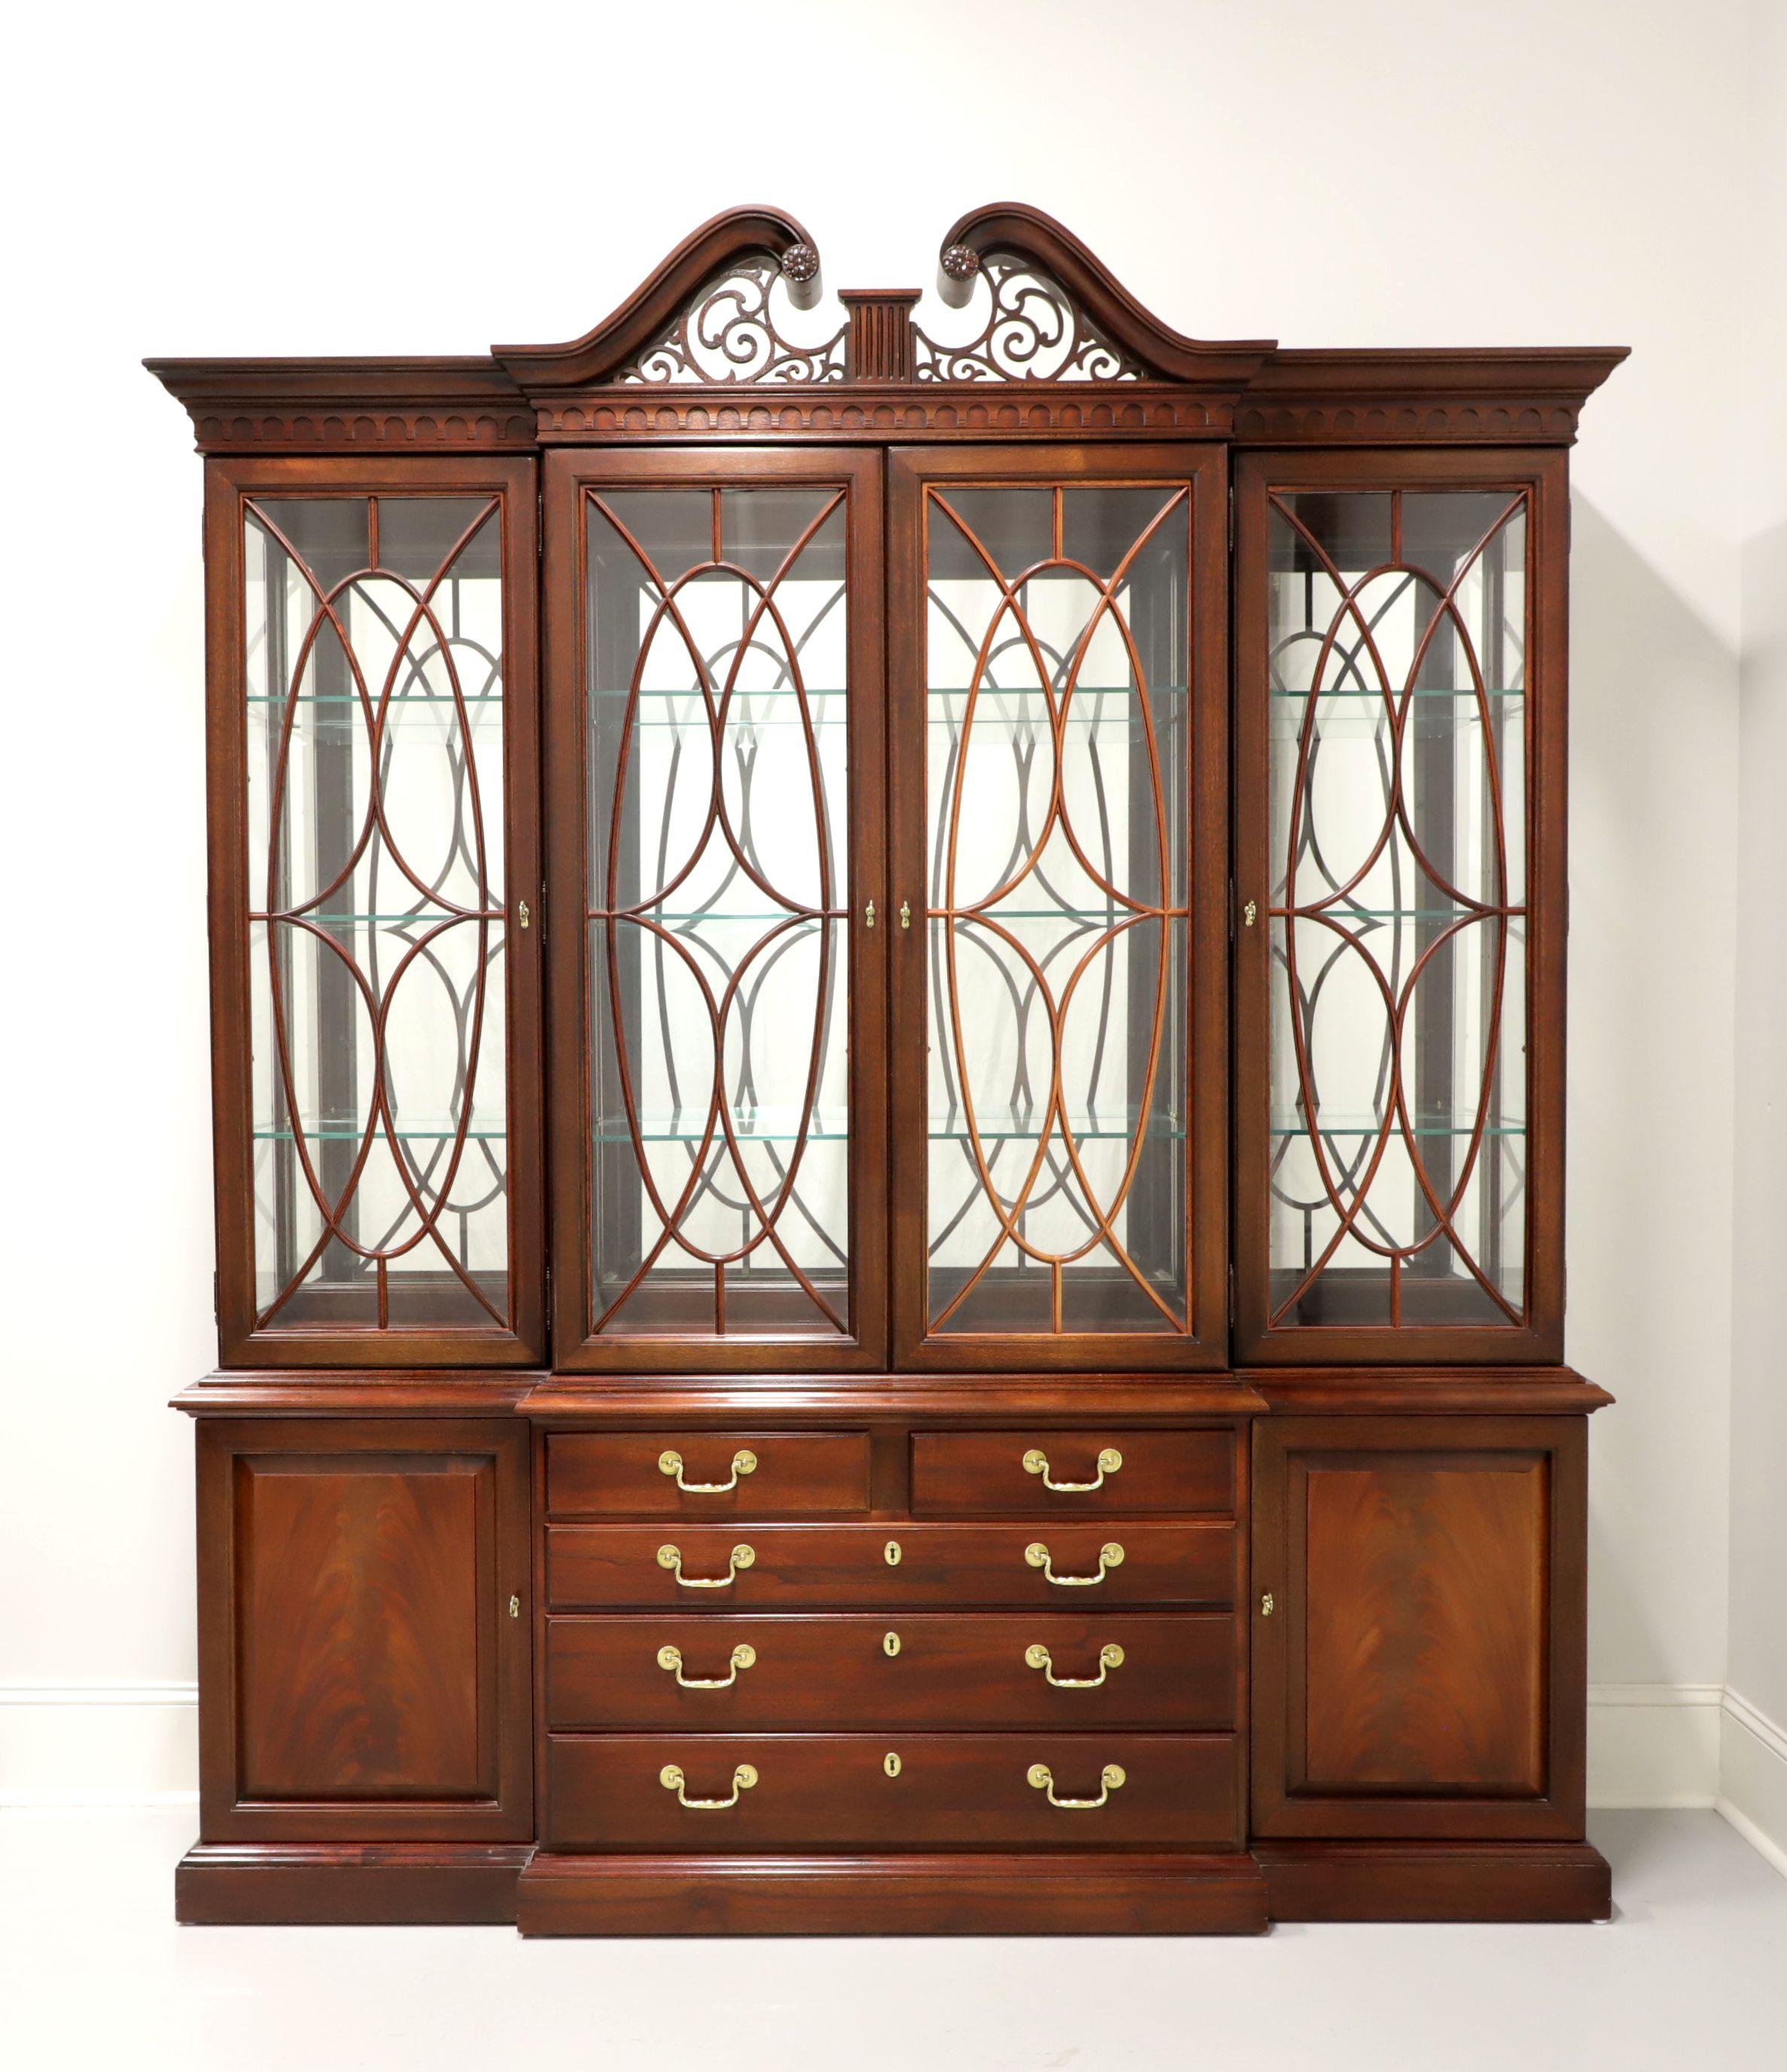 THOMASVILLE Mahogany Chippendale Style Breakfront China Cabinet 8